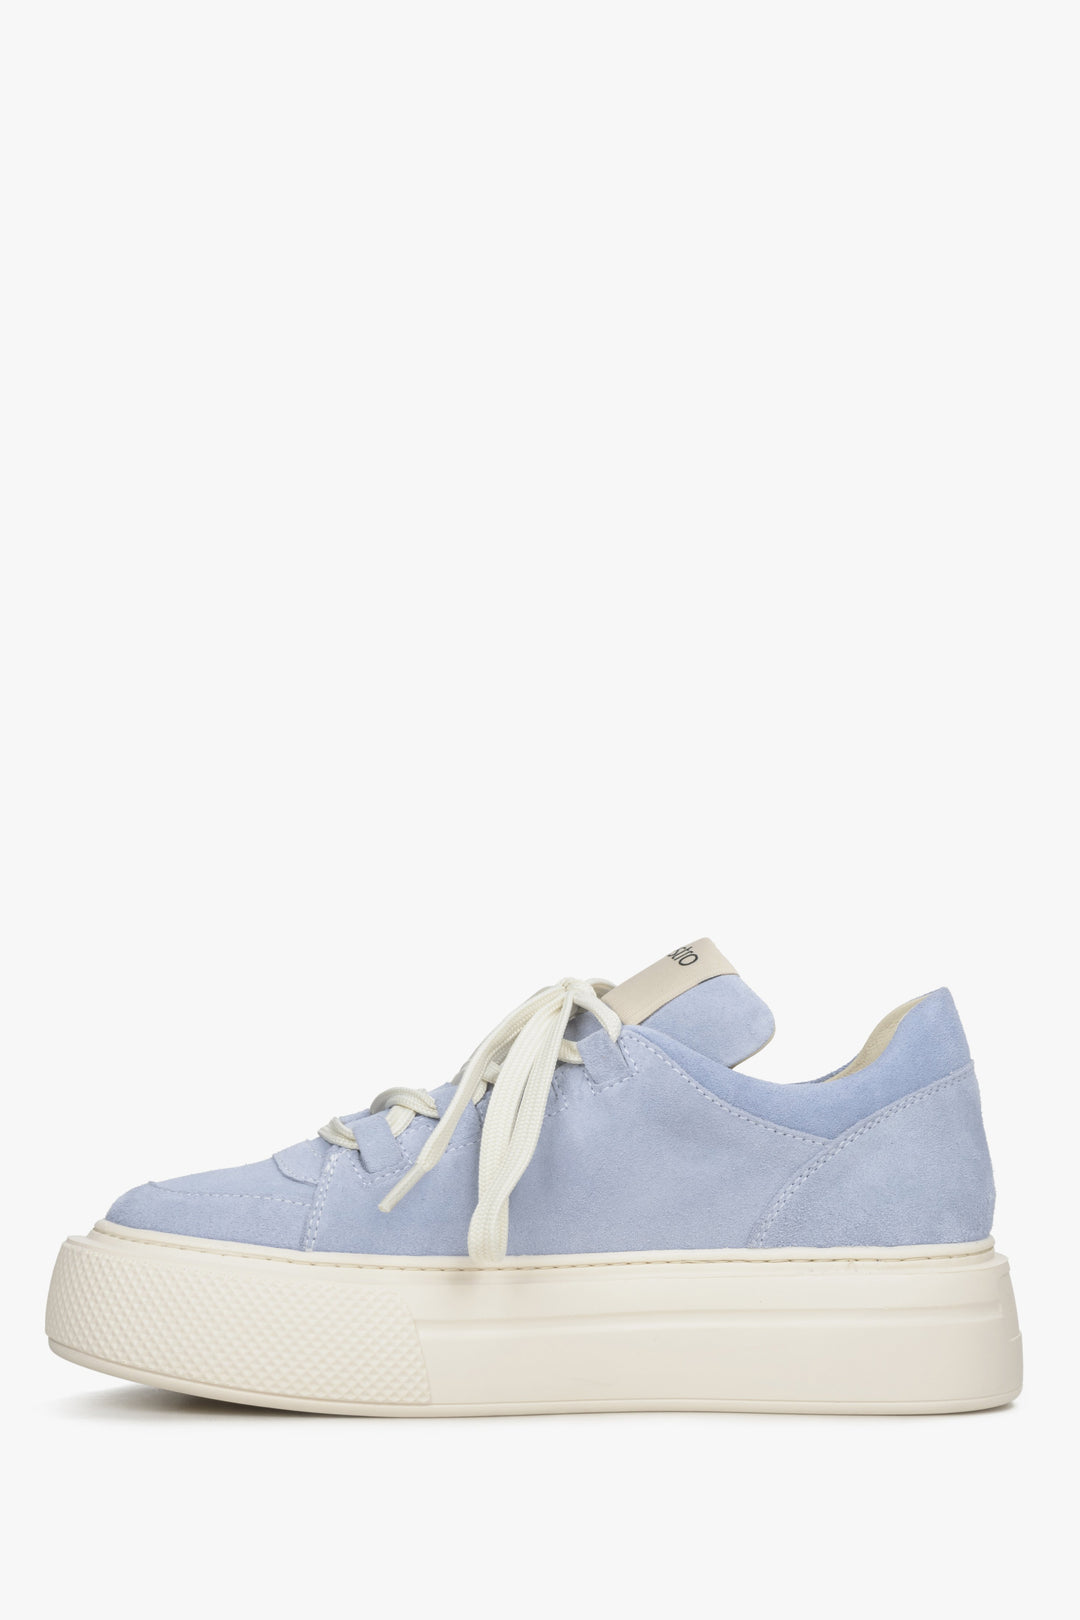 Women's blue sneakers on a thick sole - shoe profile.